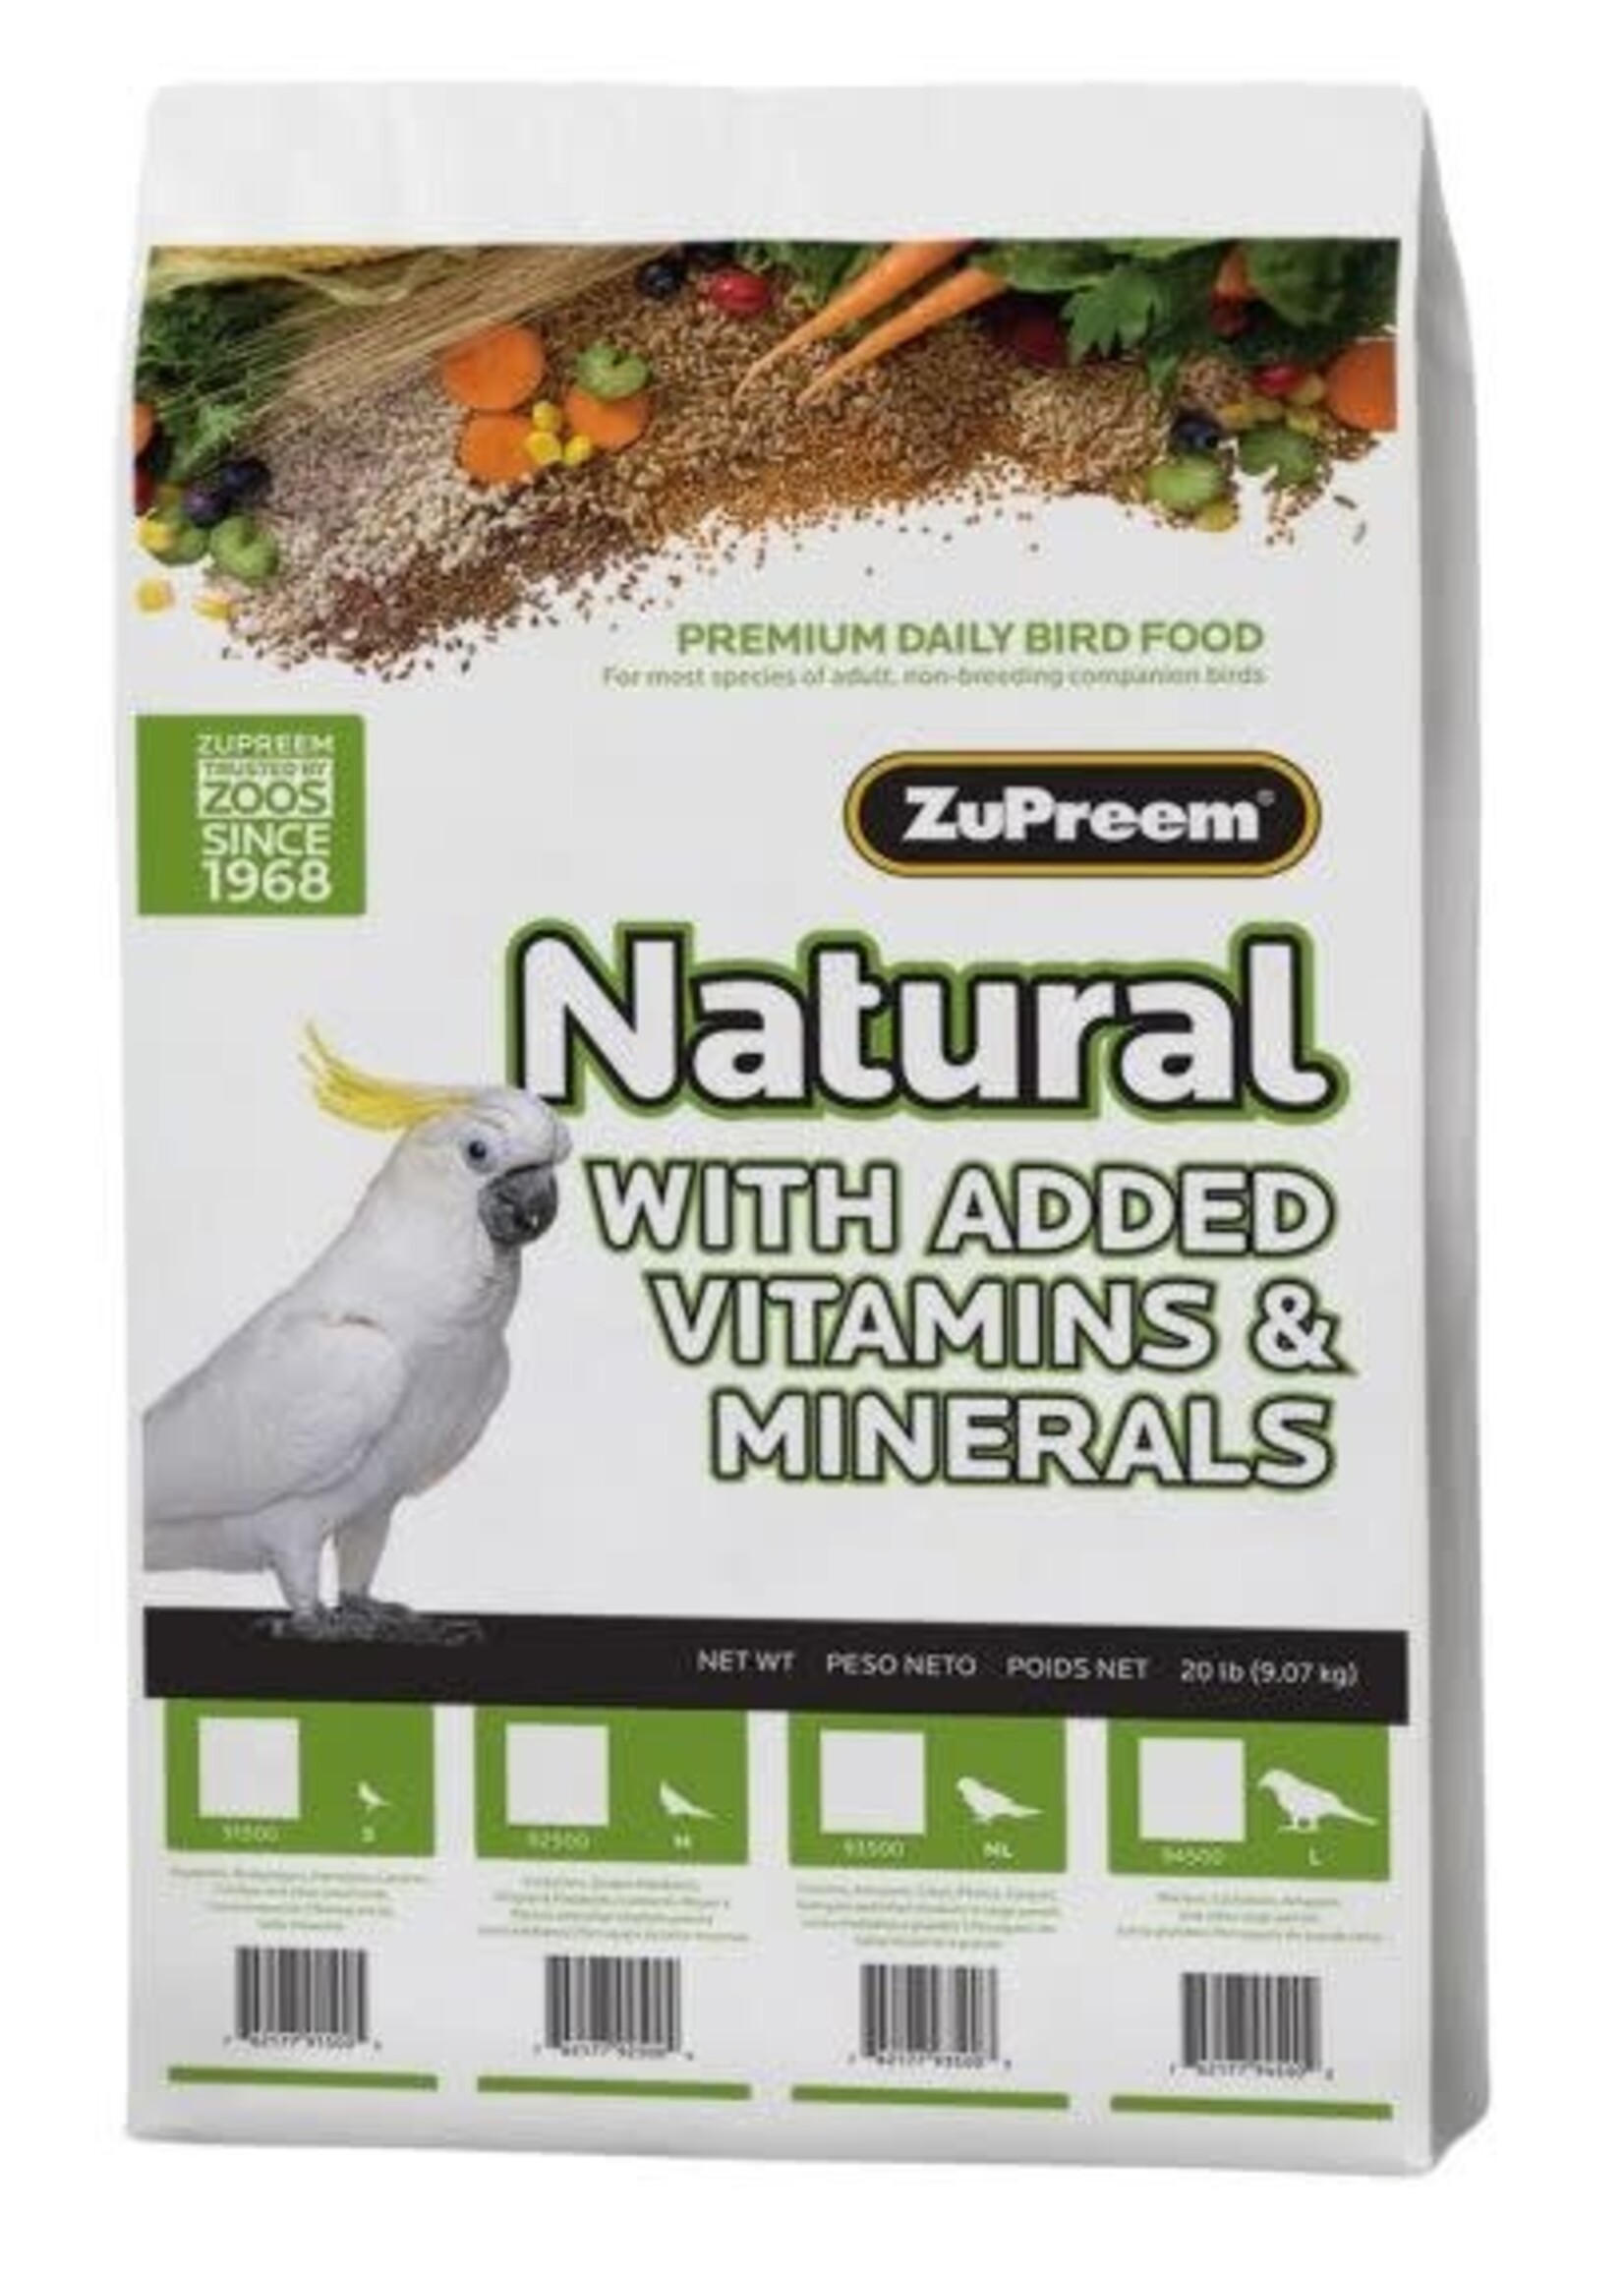 Zupreem ZuPreem "Natural" Food For Conure, Small Cockatoos & Other Medium To Large Parrot 20lbs 93500